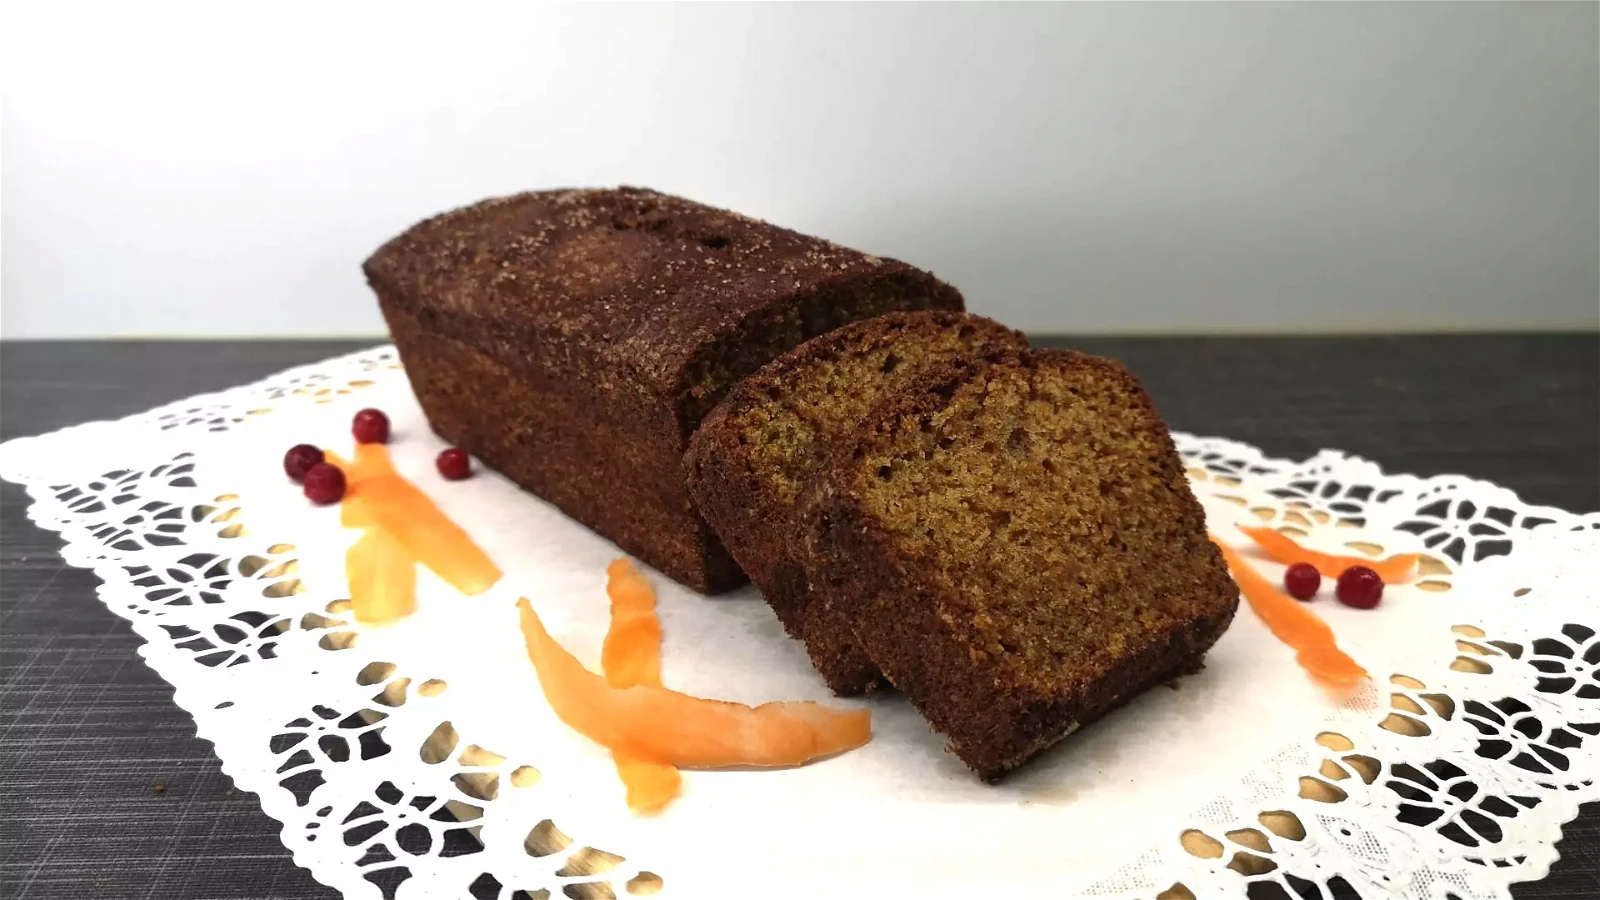 Image of Carrot cake with lingonberry